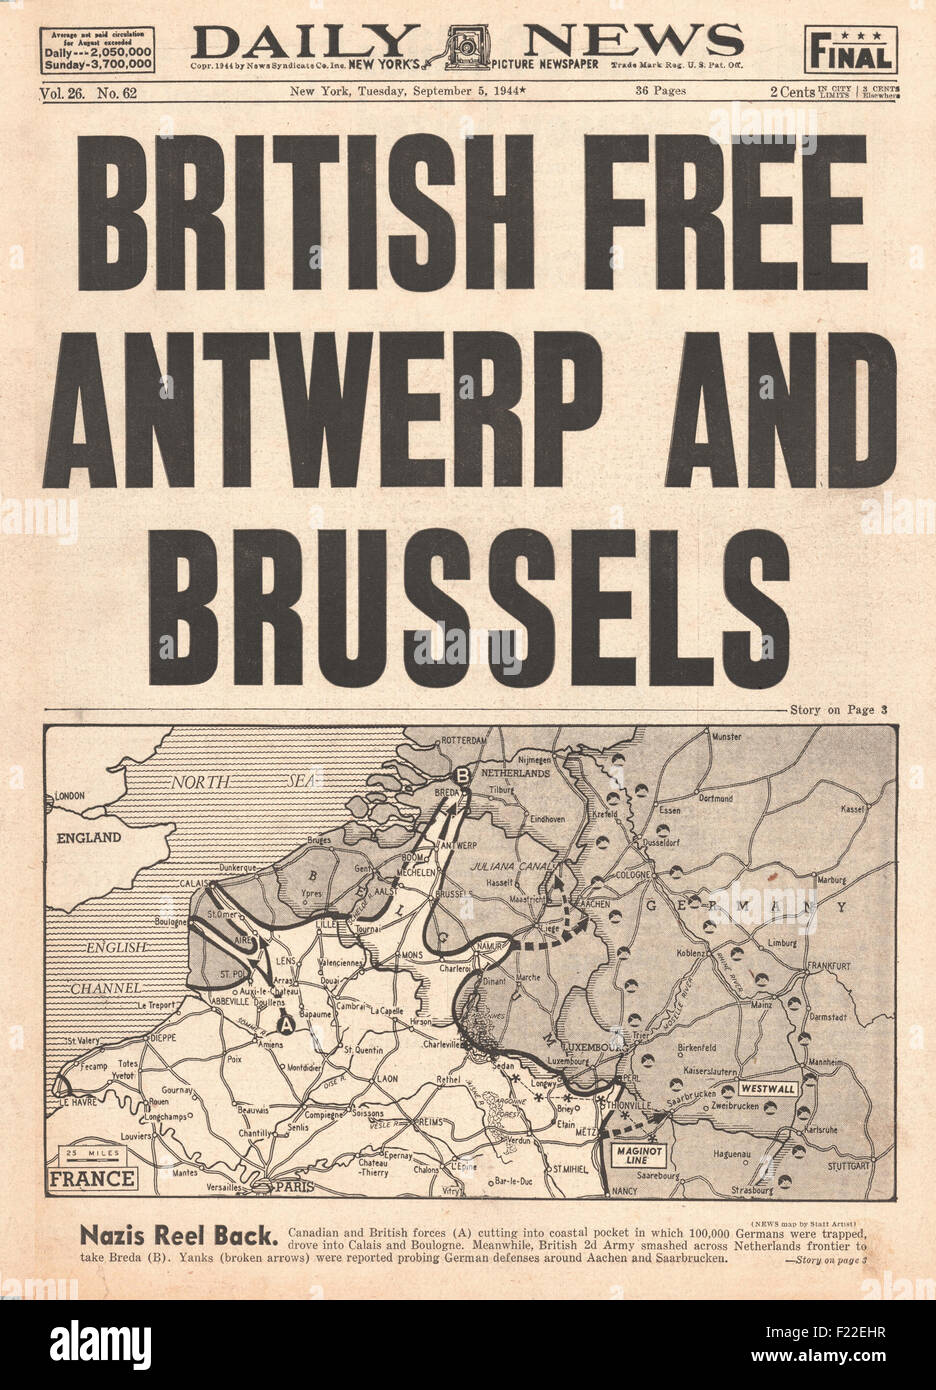 1944 Daily News (New York) front page reporting British Army liberate Brussels and Antwerp Stock Photo